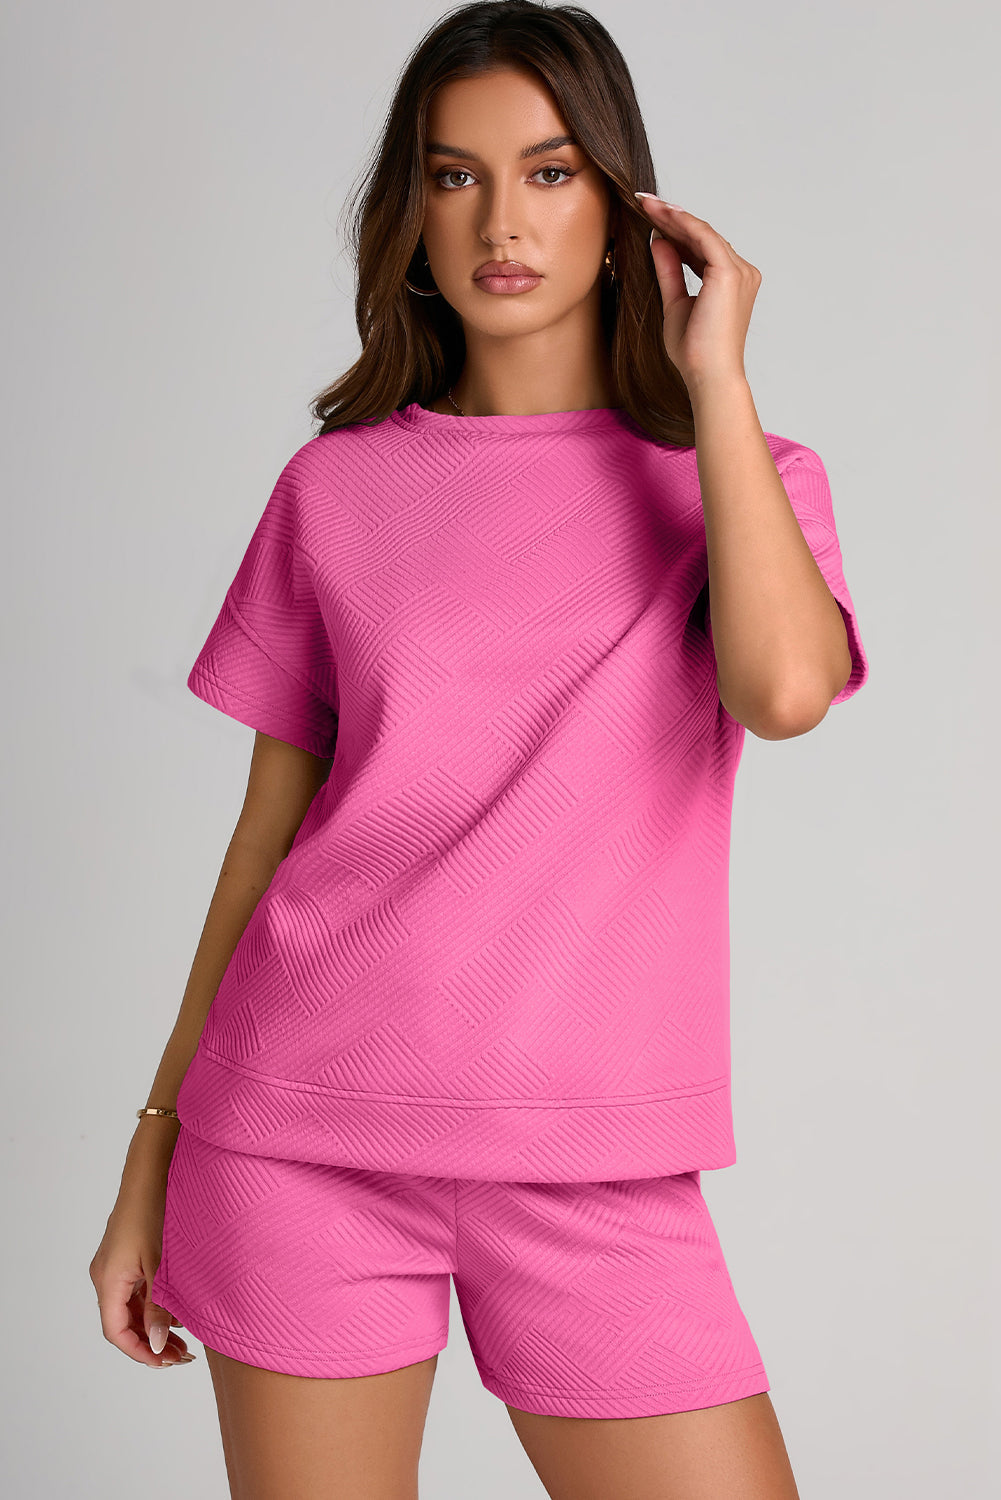 Textured Round Neck T-Shirt and Shorts Set - Fuchsia Pink / M - T-Shirts - Outfit Sets - 10 - 2024